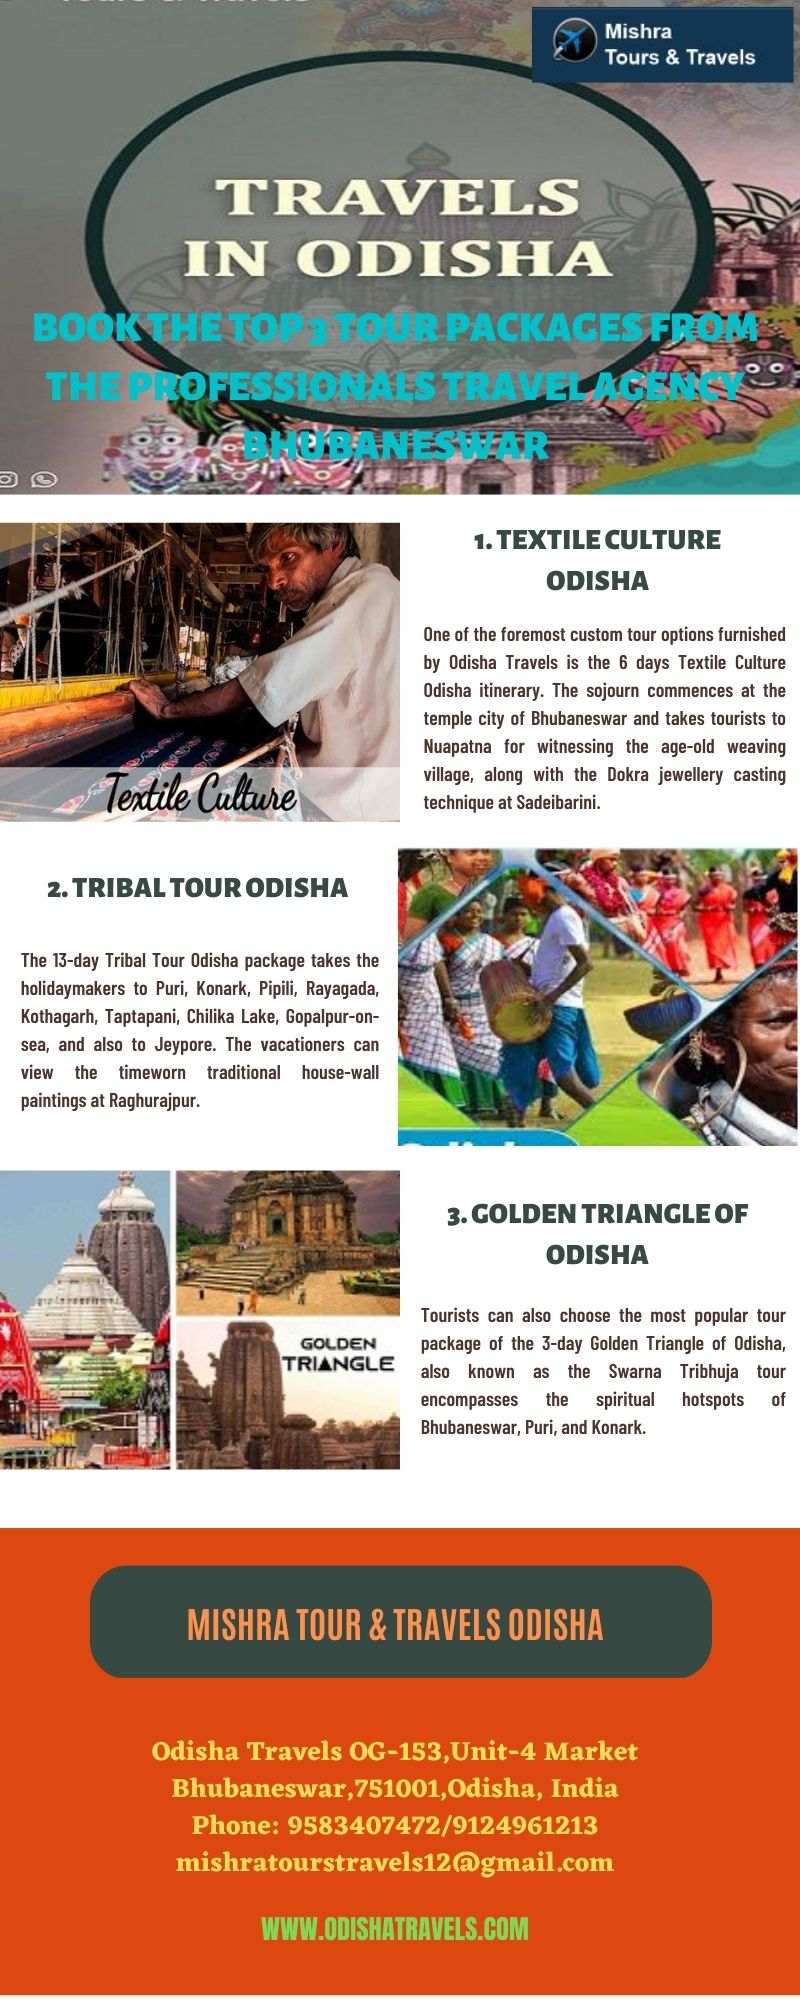 Book the top 3 tour packages from the Professionals travel Agency Bhubaneswar Odisha Travels, the leading Professionals travel Agency Bhubaneswar presents customized and feasible tour packages, along with cost-effective prompt car rentals. For more visit: https://www.odishatravels.com/about
 by Odishatravels